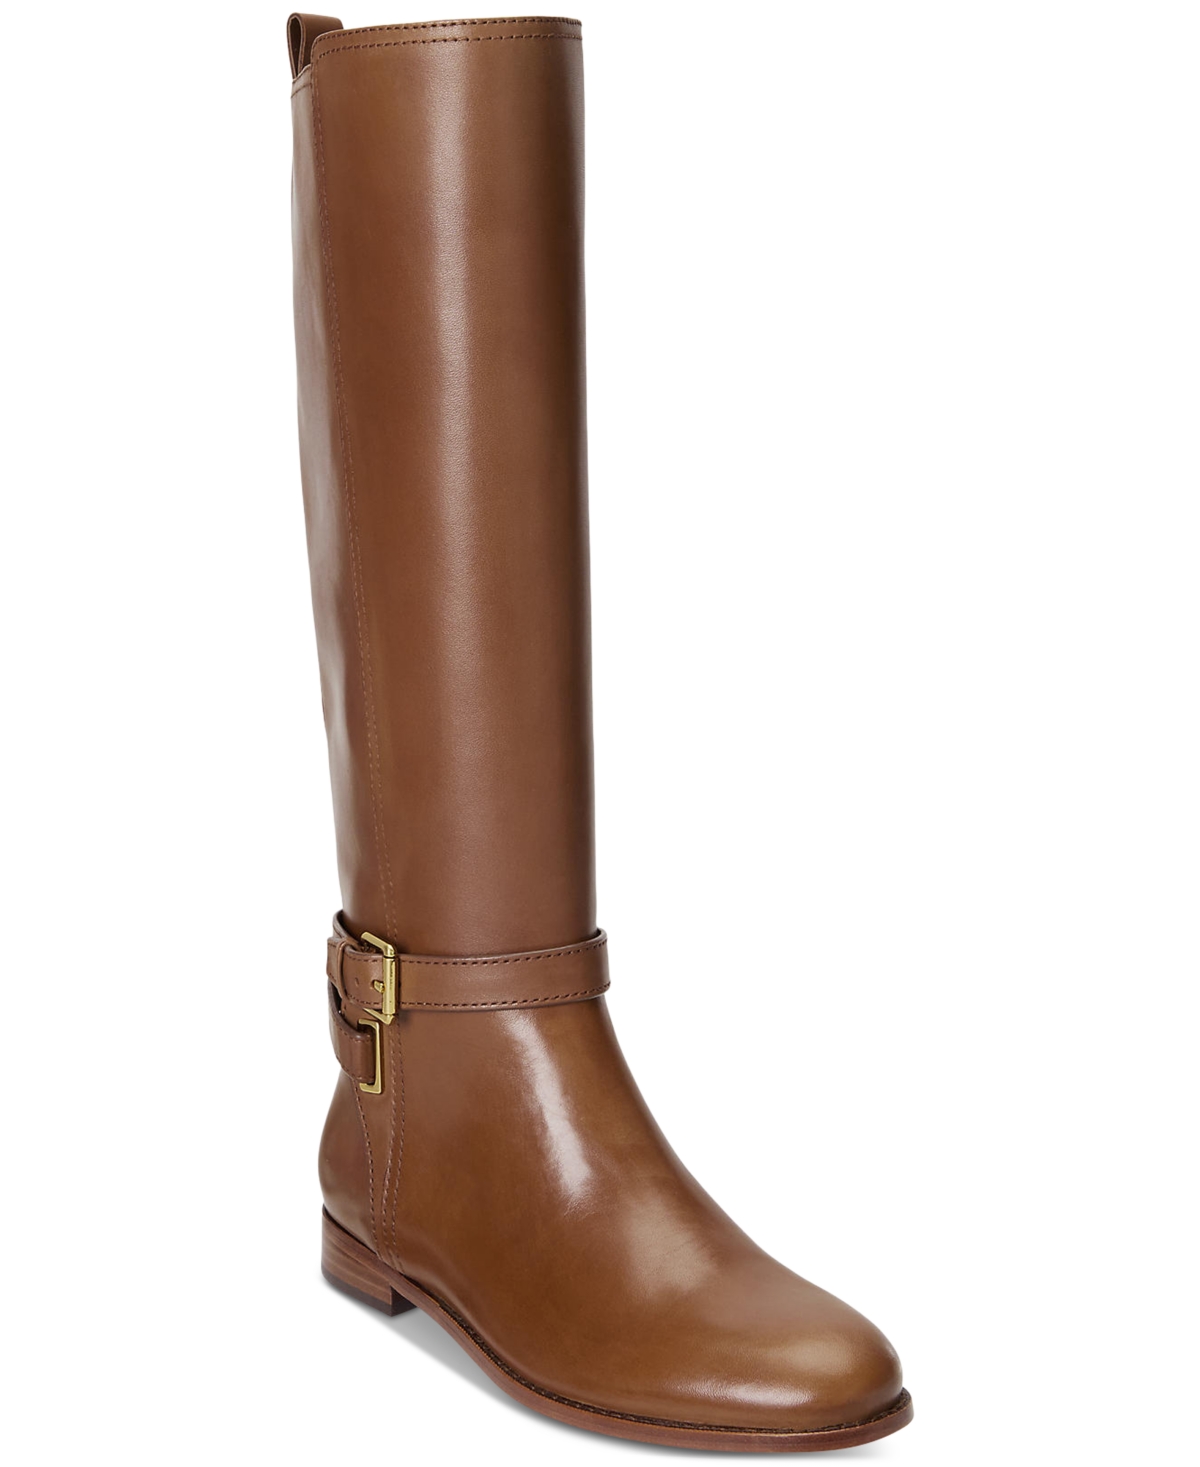 Lauren Ralph Lauren Women's Hollie Quilted Lace-up Riding Boots In Deep Saddle Tan